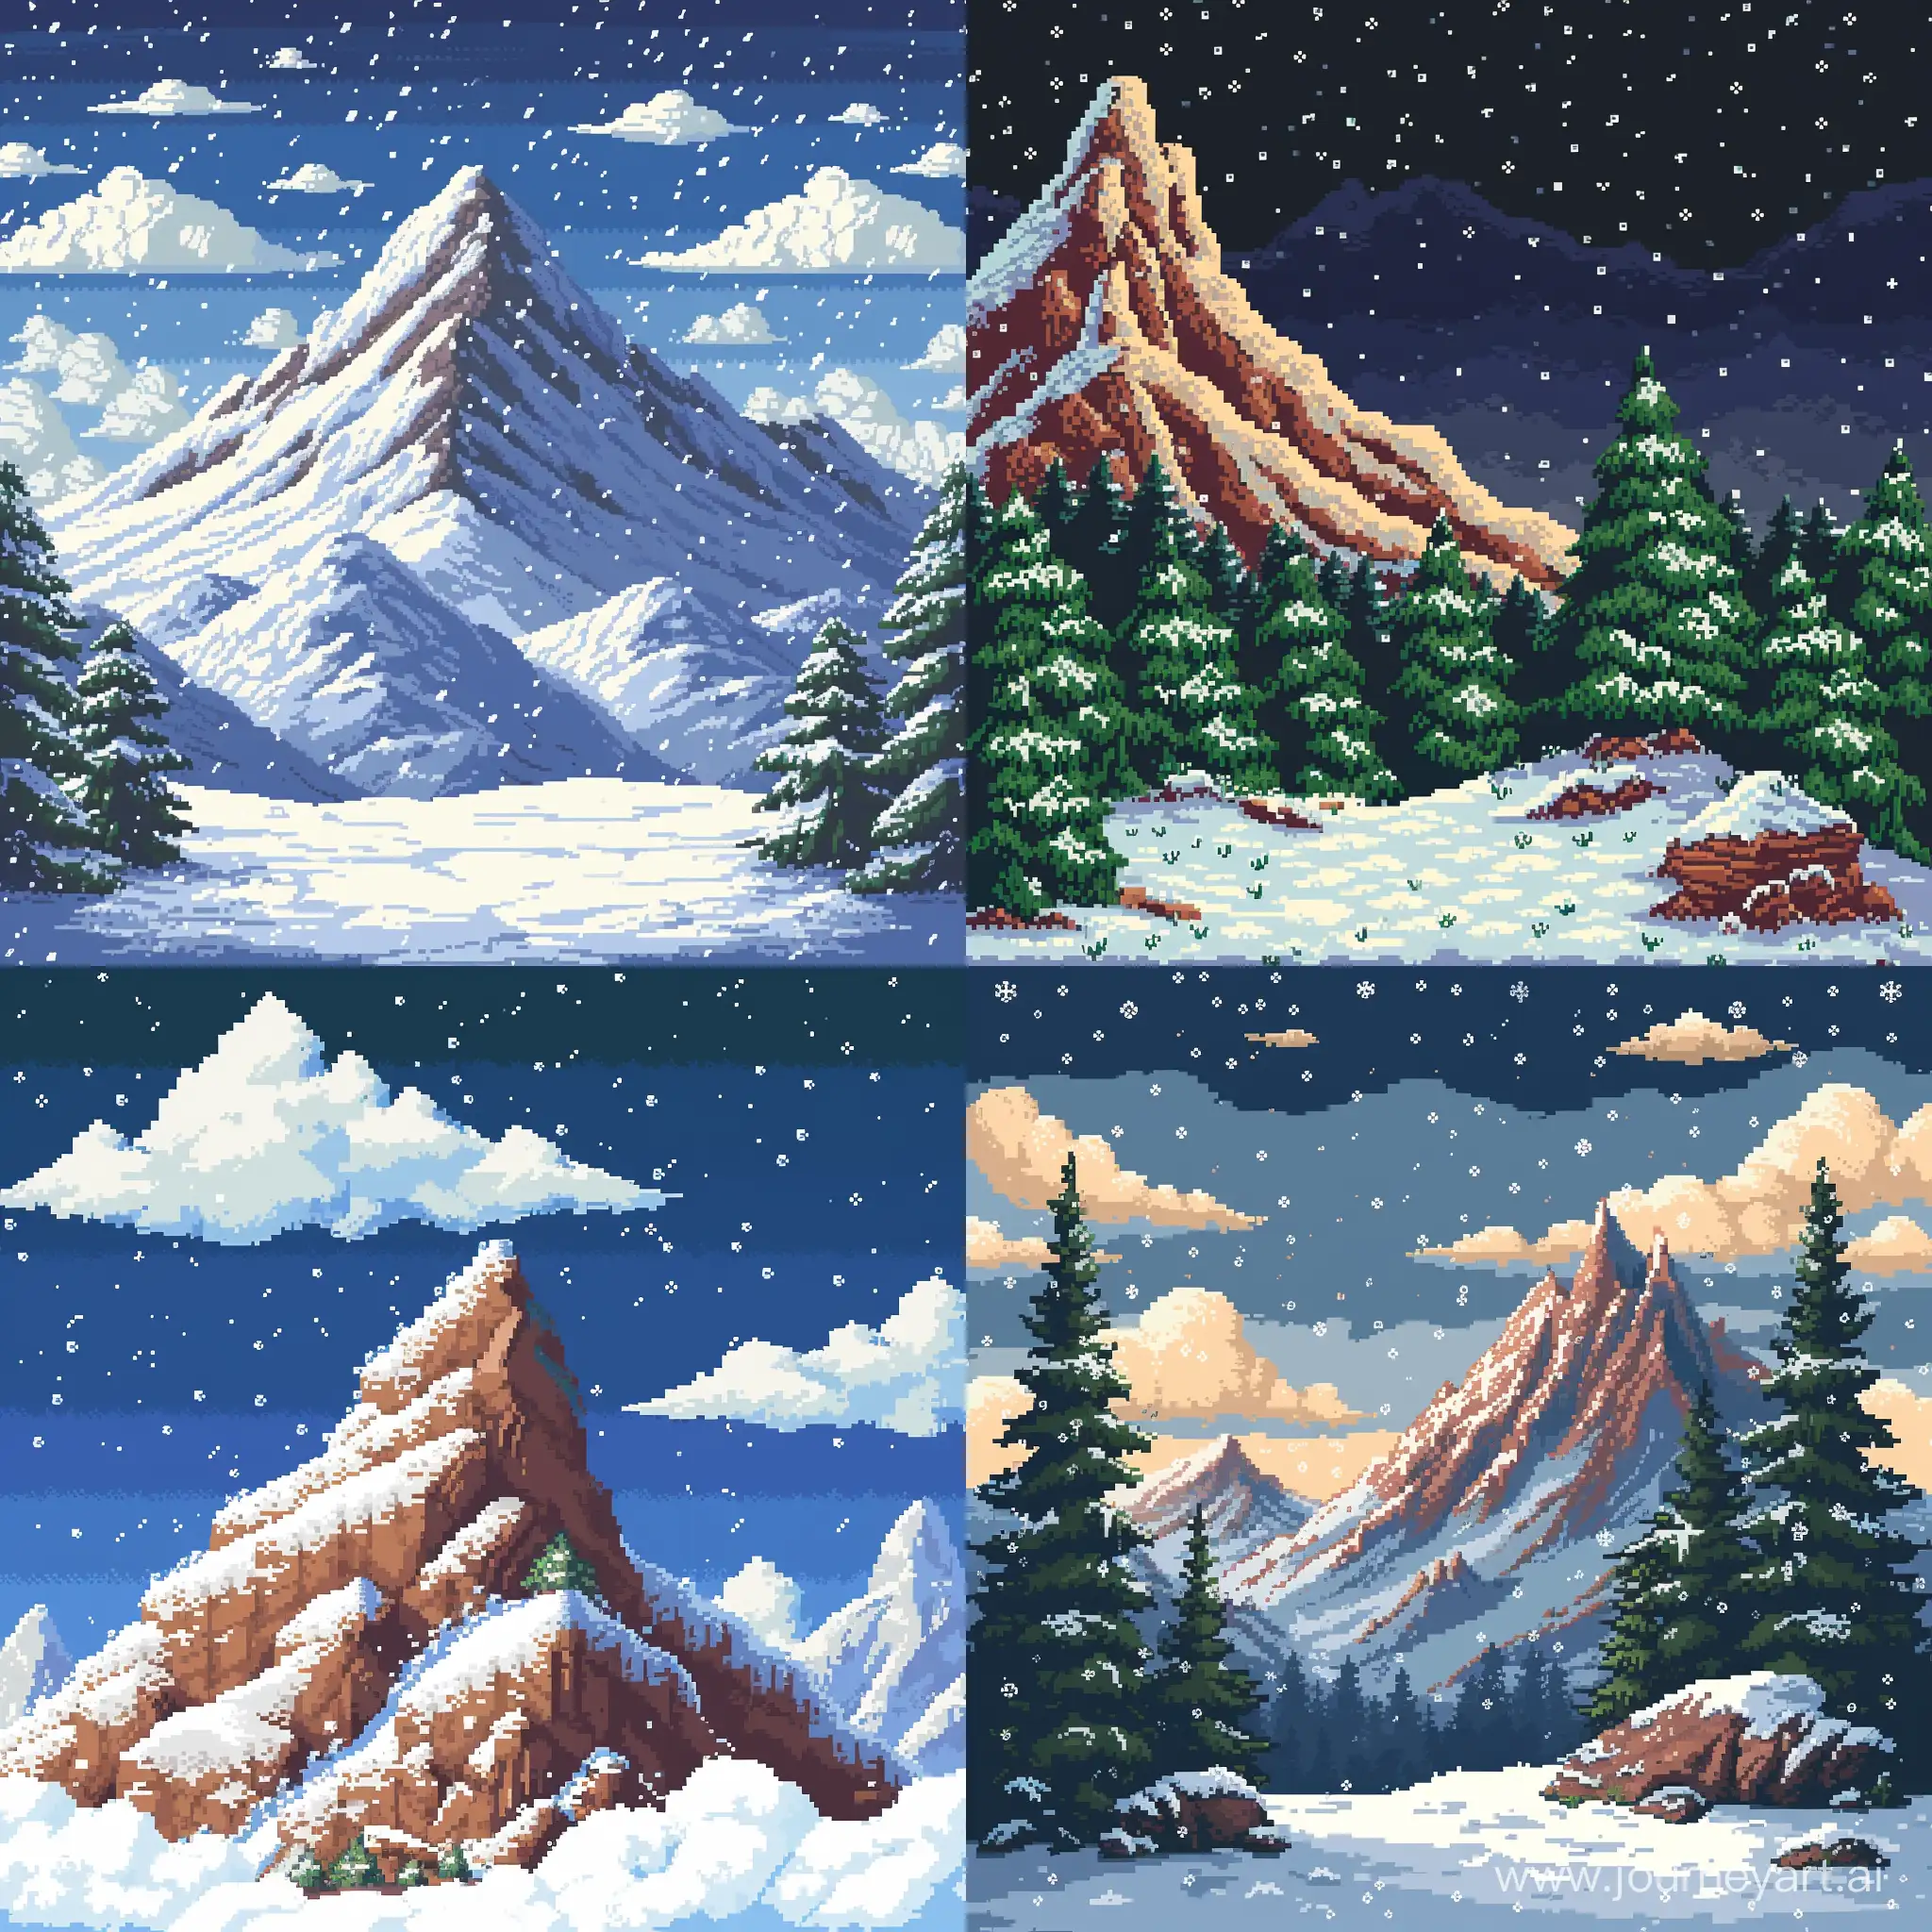 8-bit style, landscape design, include special mountain, sharp colors, snow in the sky